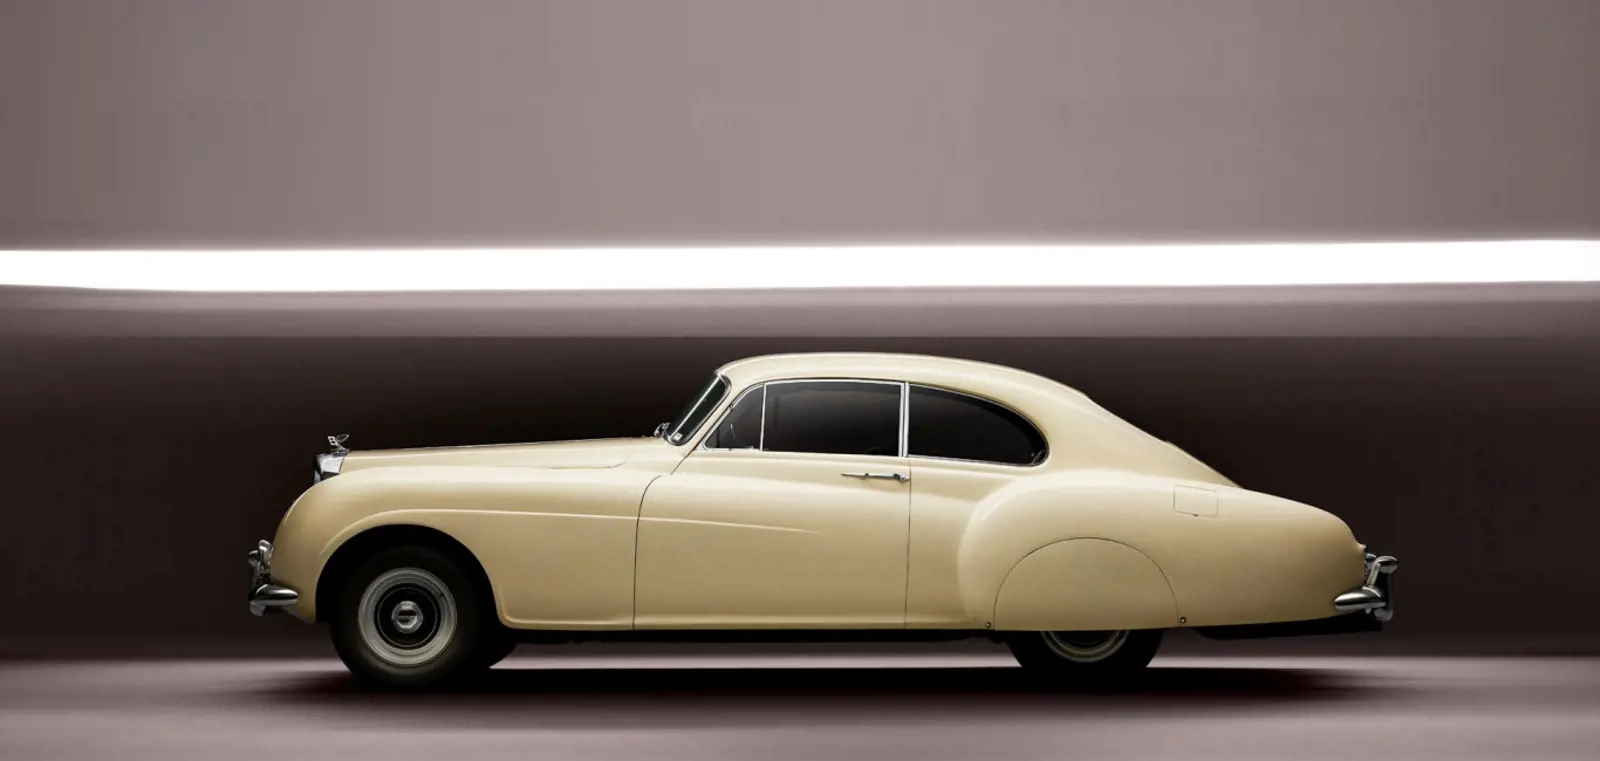 The Story Of The Bentley Continental - The 1952 R-Type Continental